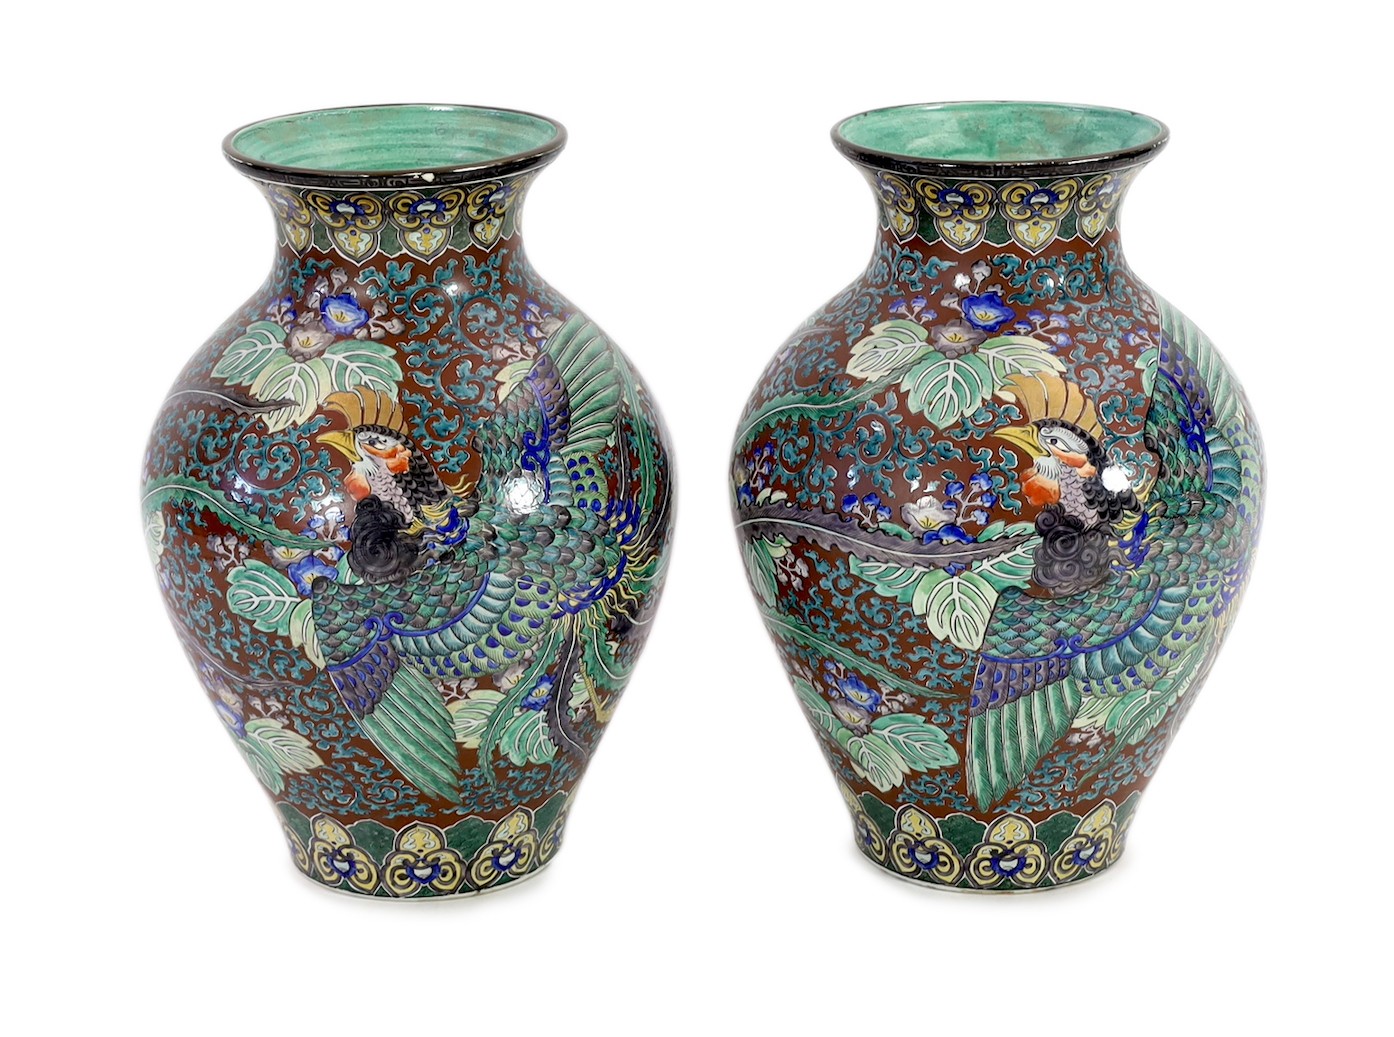 A pair of massive Japanese Kutani porcelain vases, Meiji period, influenced by de Morgan designs, 61.5cm high, one repaired                                                                                                 